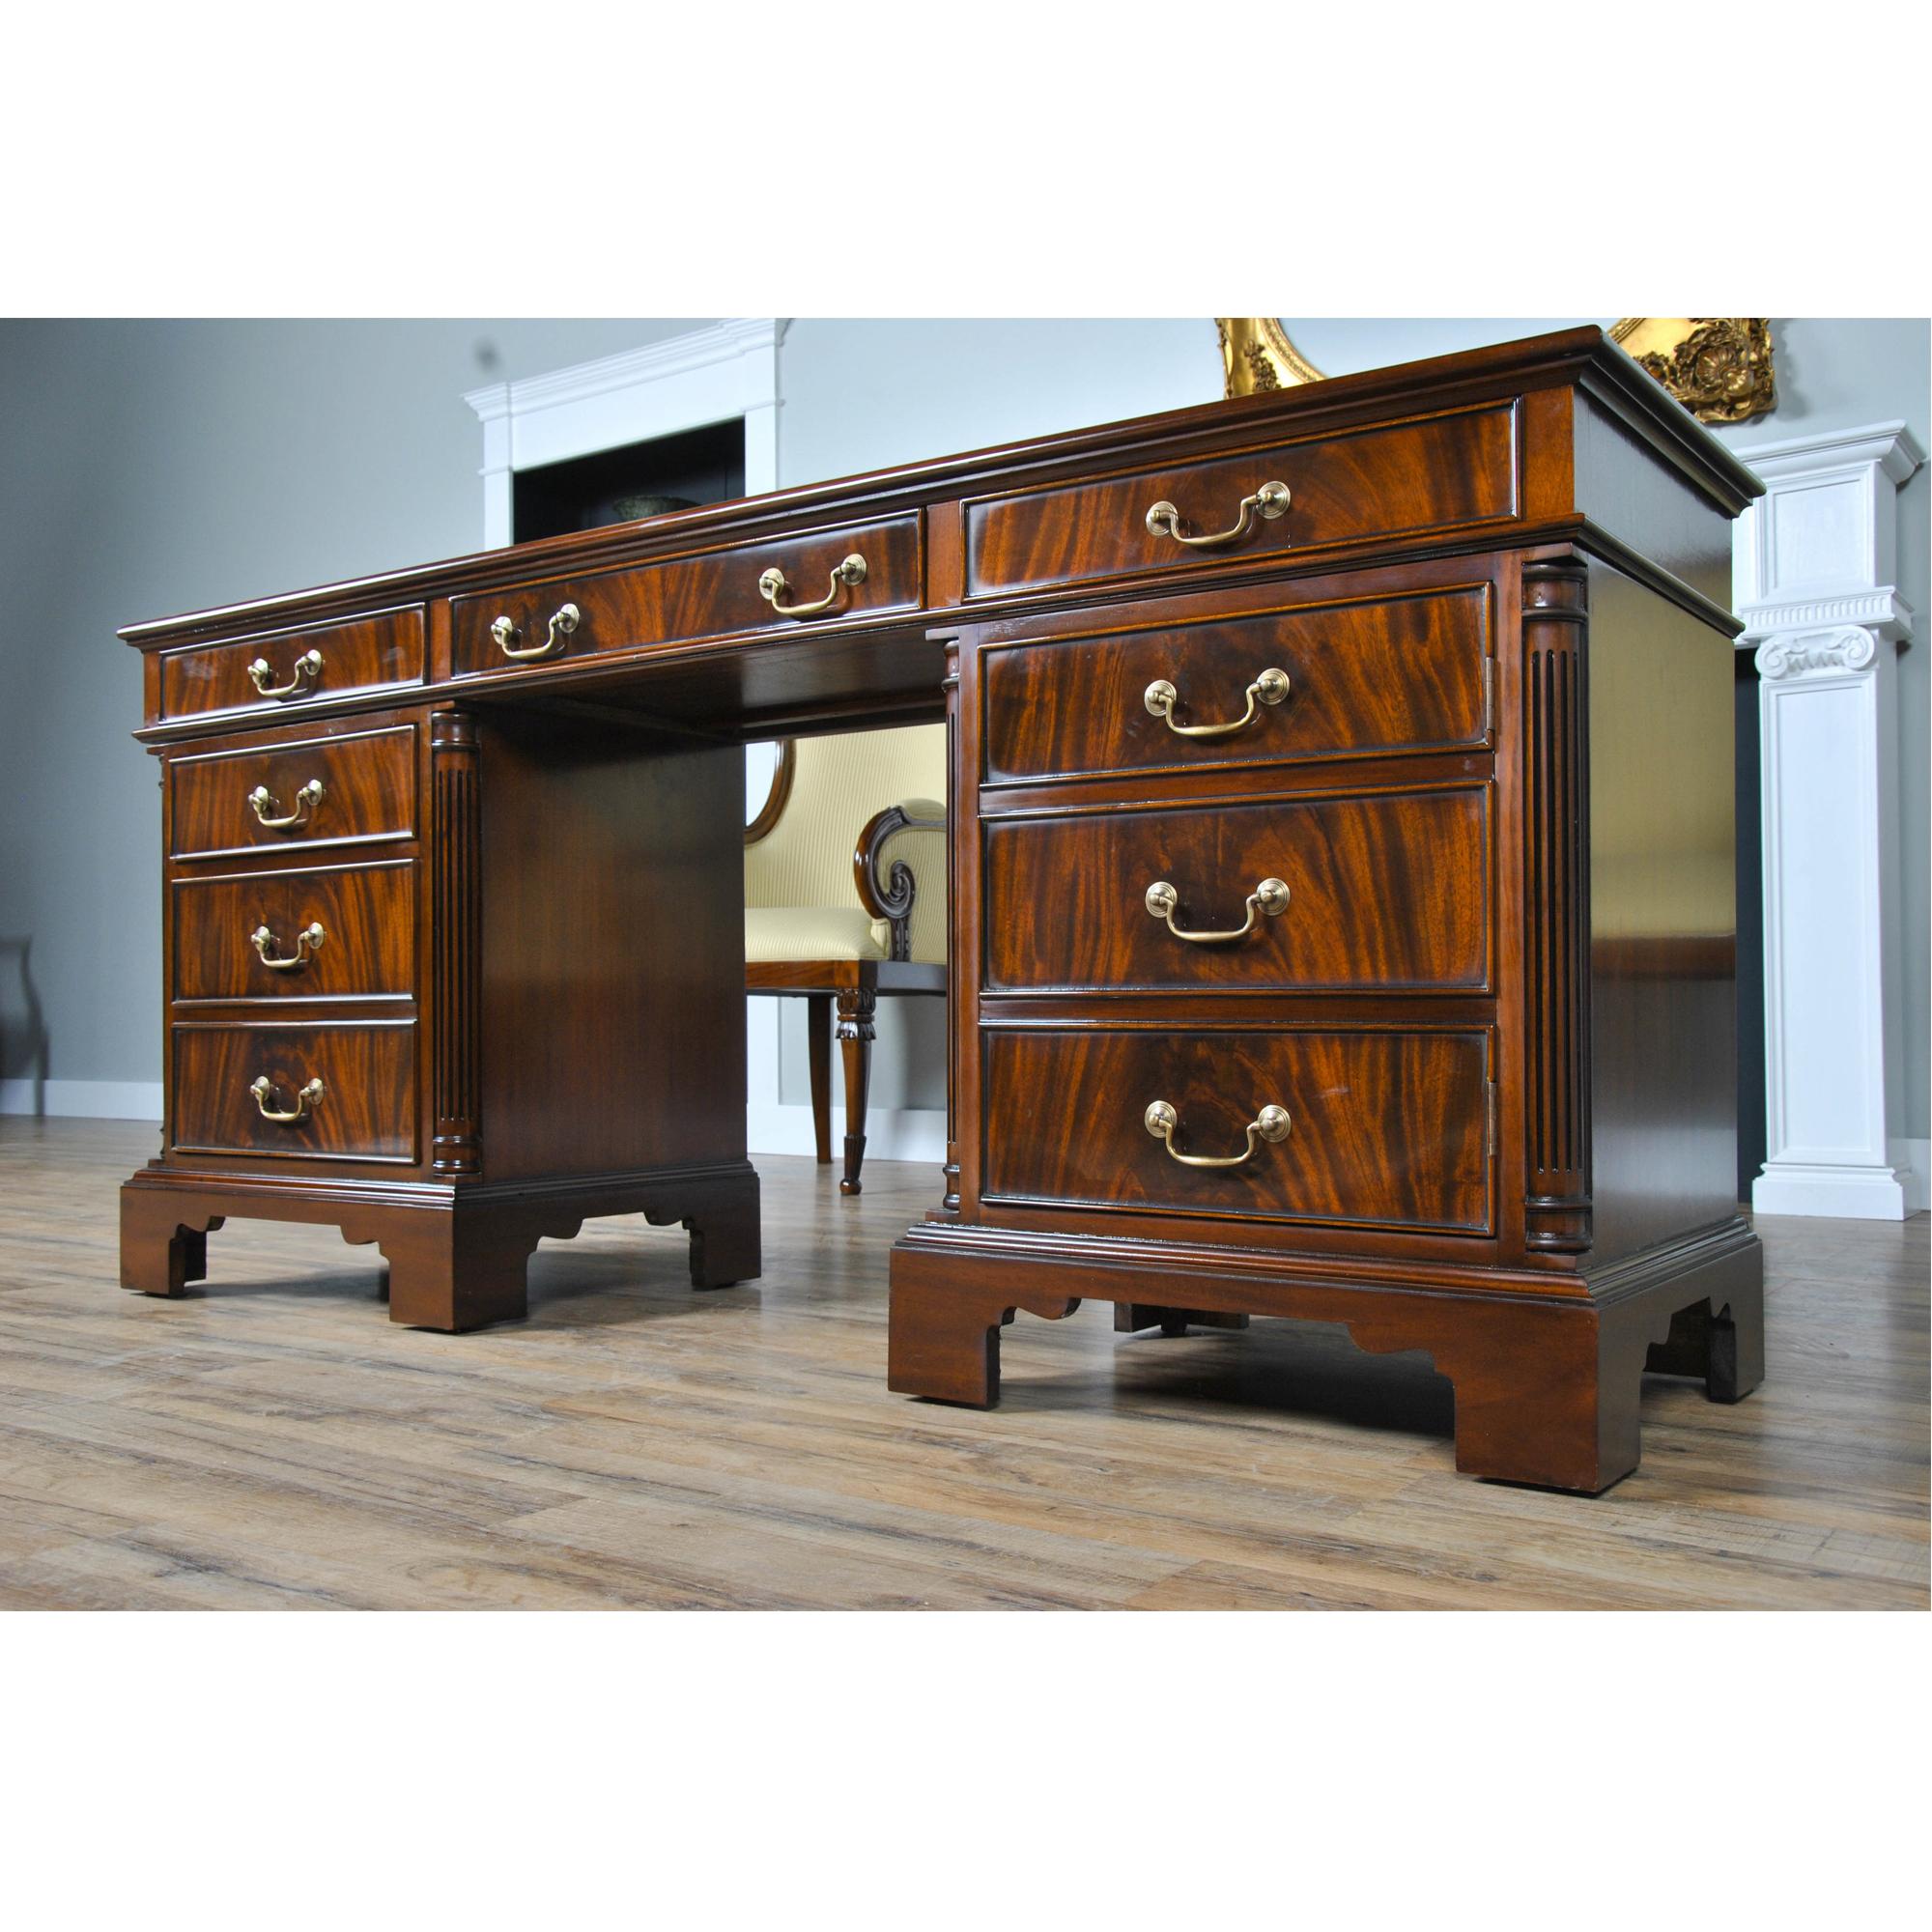 This Mahogany Credenza matches a number of other items in the Niagara Furniture office collection. The credenza utilizes three part construction, the top and two pedestals separate from one another for shipping and installation. The top section